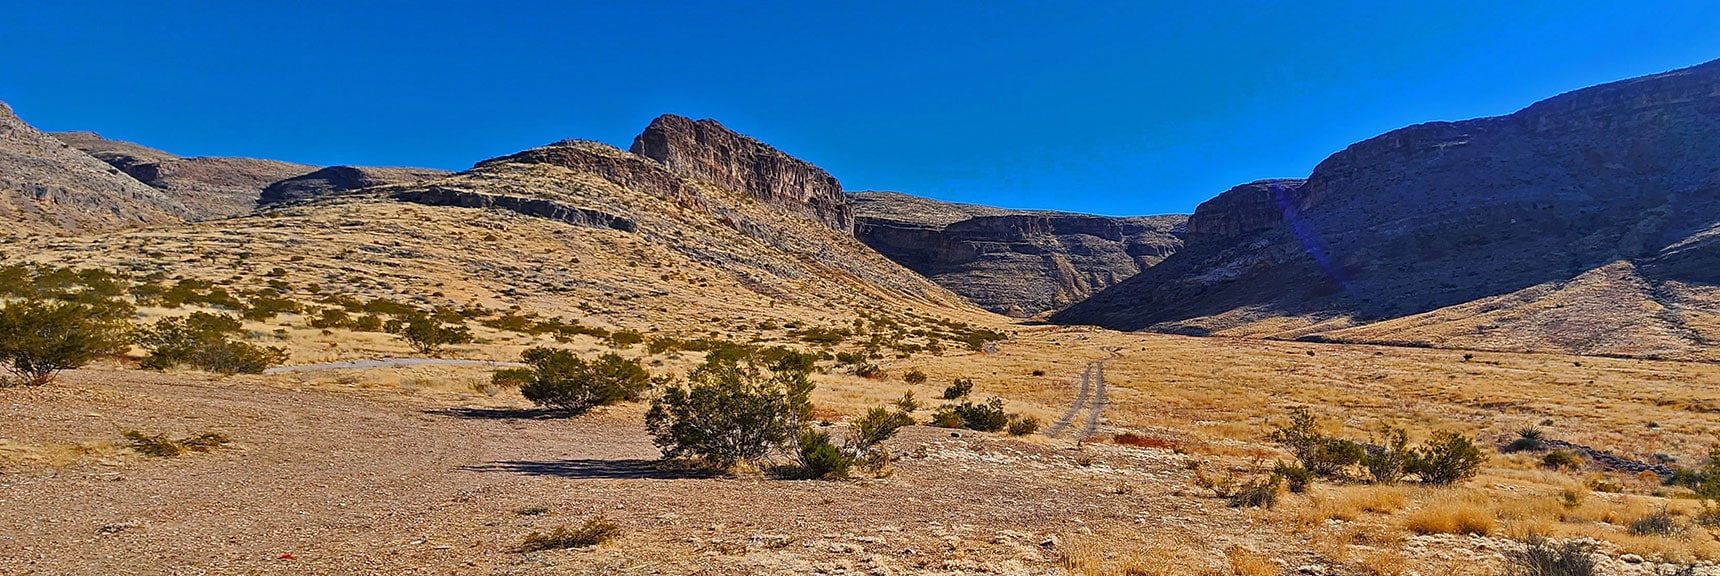 Road Leading into Cave Canyon & Cave | Landmark Bluff Summit | Lovell Canyon, Nevada